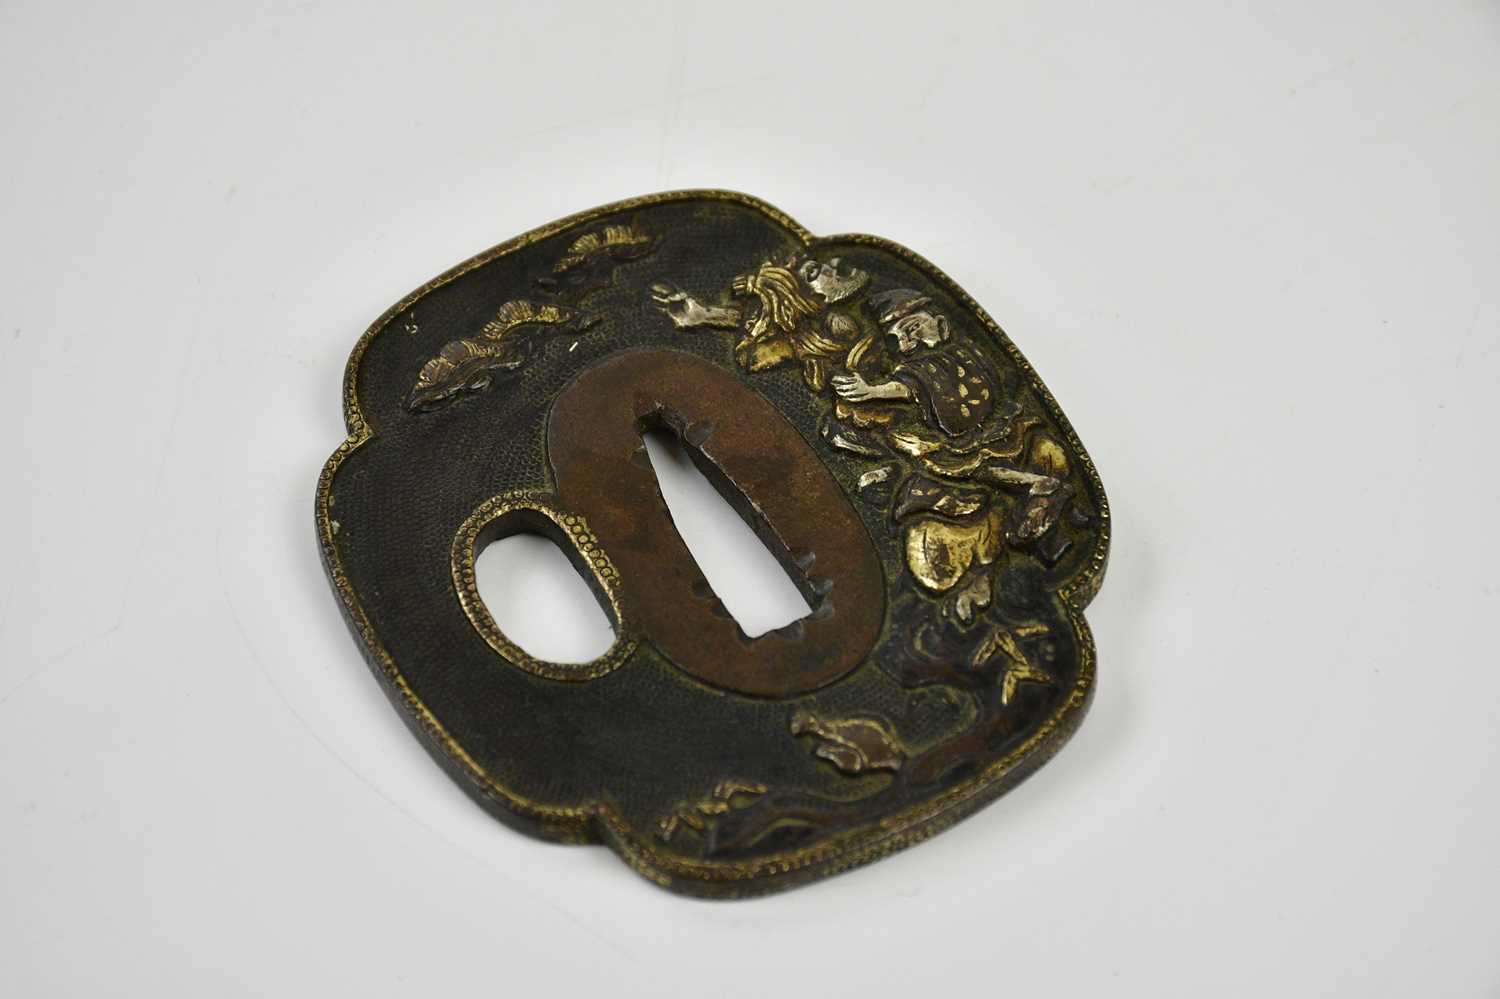 A Japanese bronze tsuba with gilt highlights, approx 7 x 6cm. - Image 2 of 4